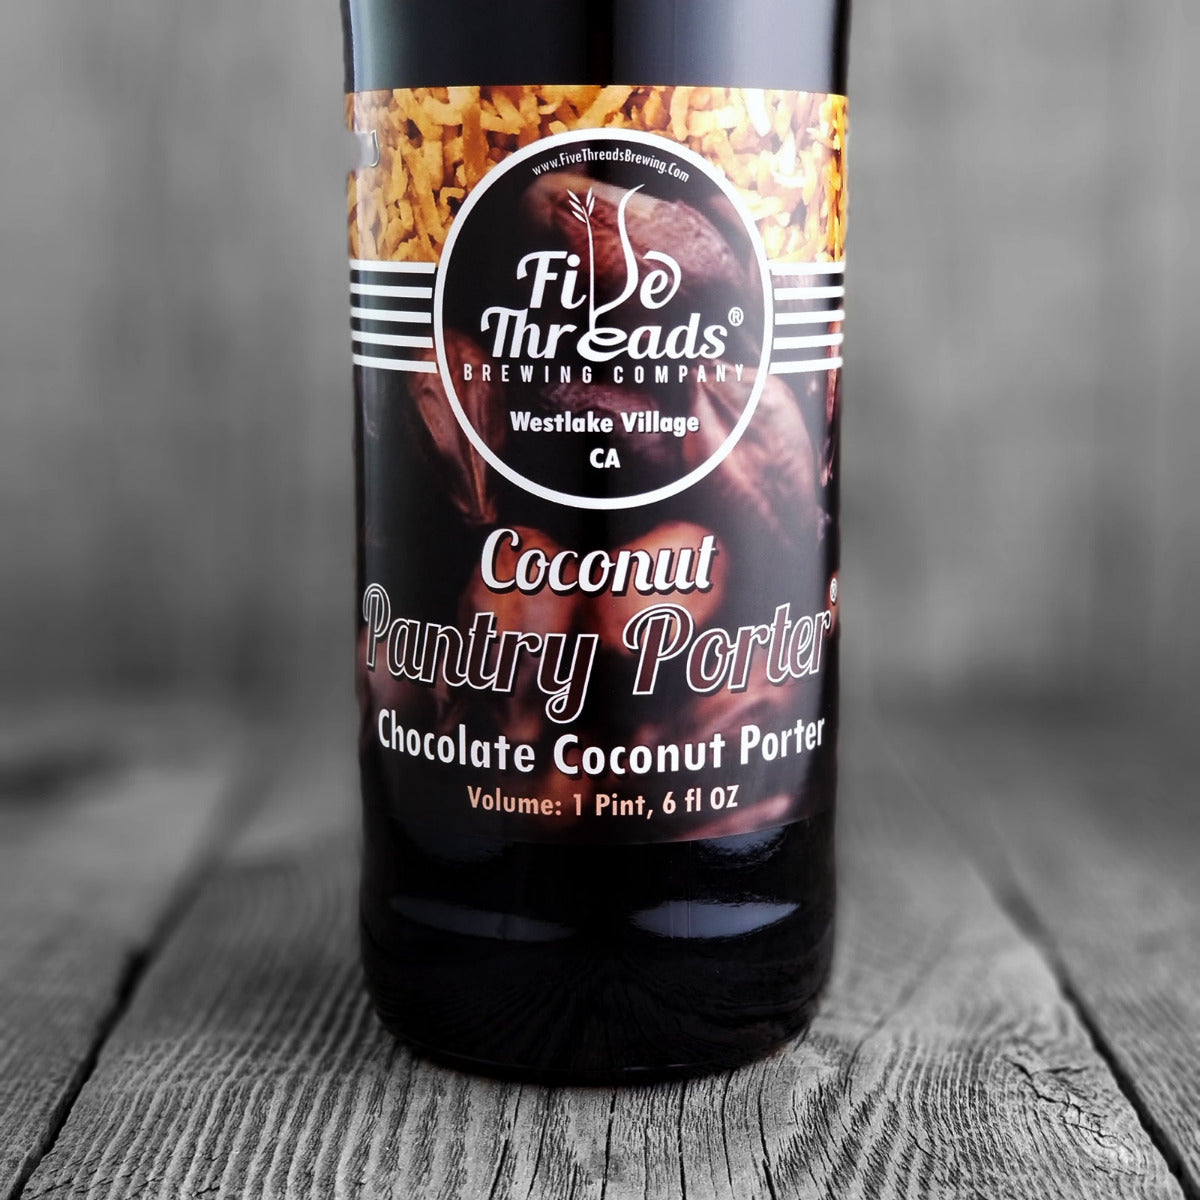 Five Threads Coconut Pantry Porter